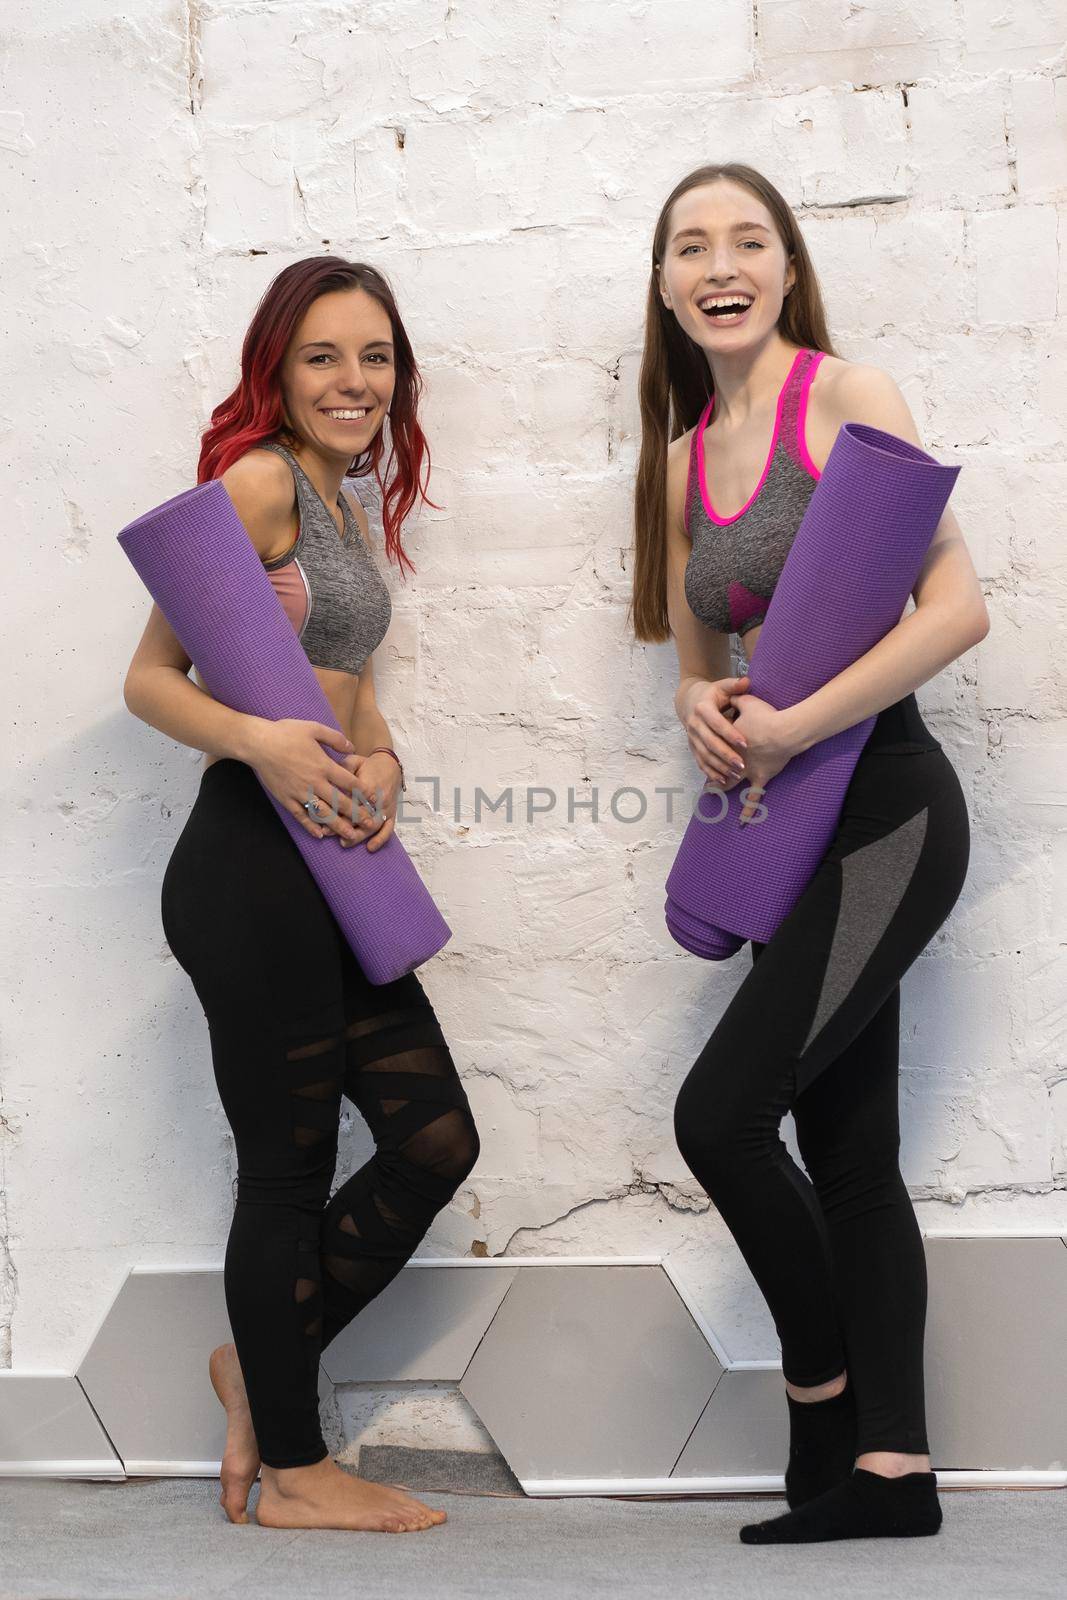 Two pretty fitness girls in sports out fits holding a yoga mat standing next to the white wall, smiling on camera isolated on wall background. Practicing in studio, working out indoor. Loft interior.